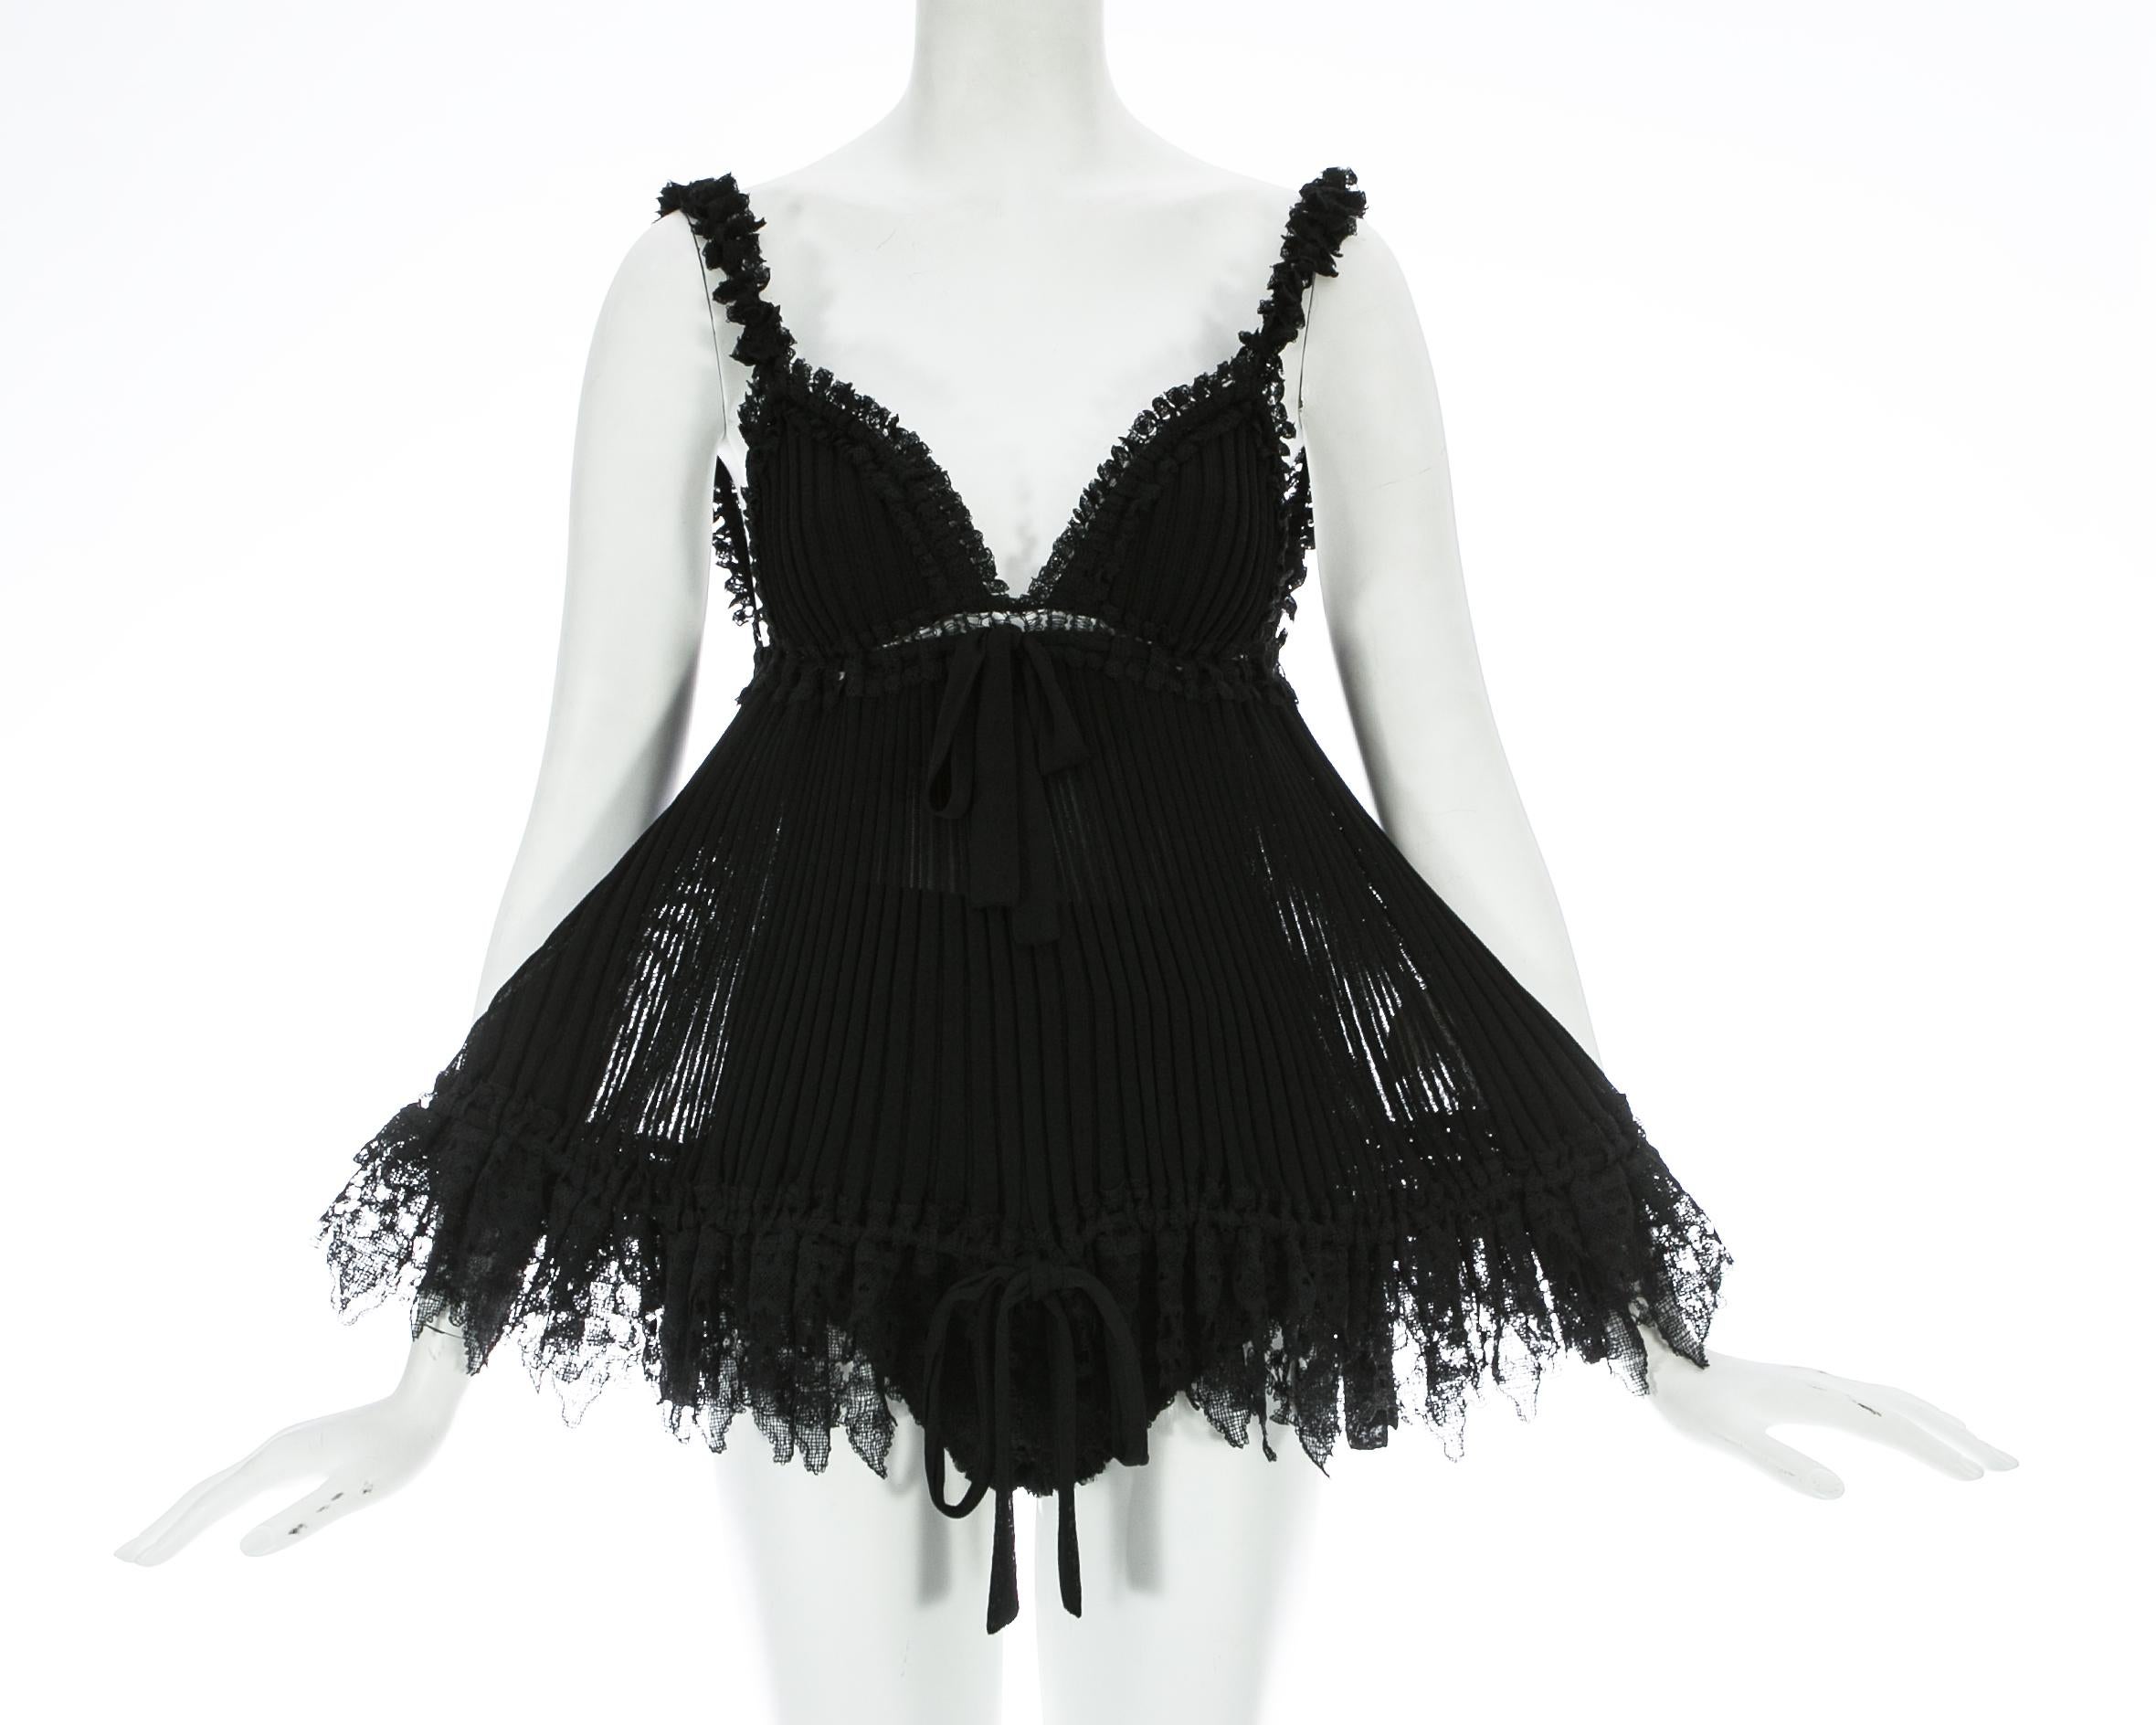 Black knitted lurex and lace babydoll vest and knickers set

Spring-Summer 1994